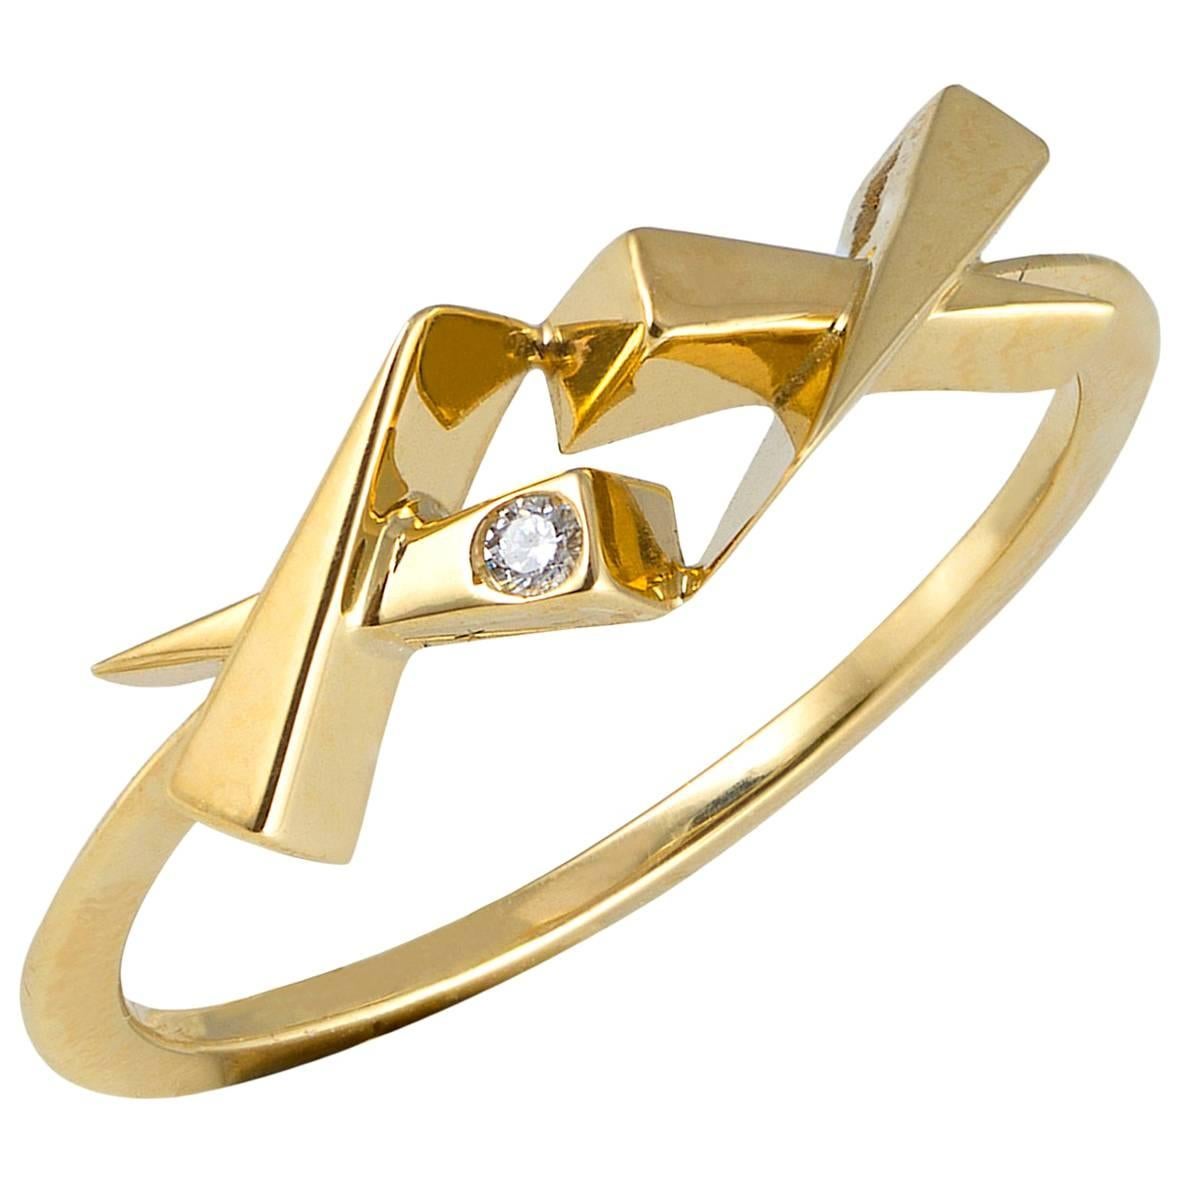 Daou Diamond Ring in 18kt Yellow Gold, Romantic Sentimental Modern Kisses Design For Sale